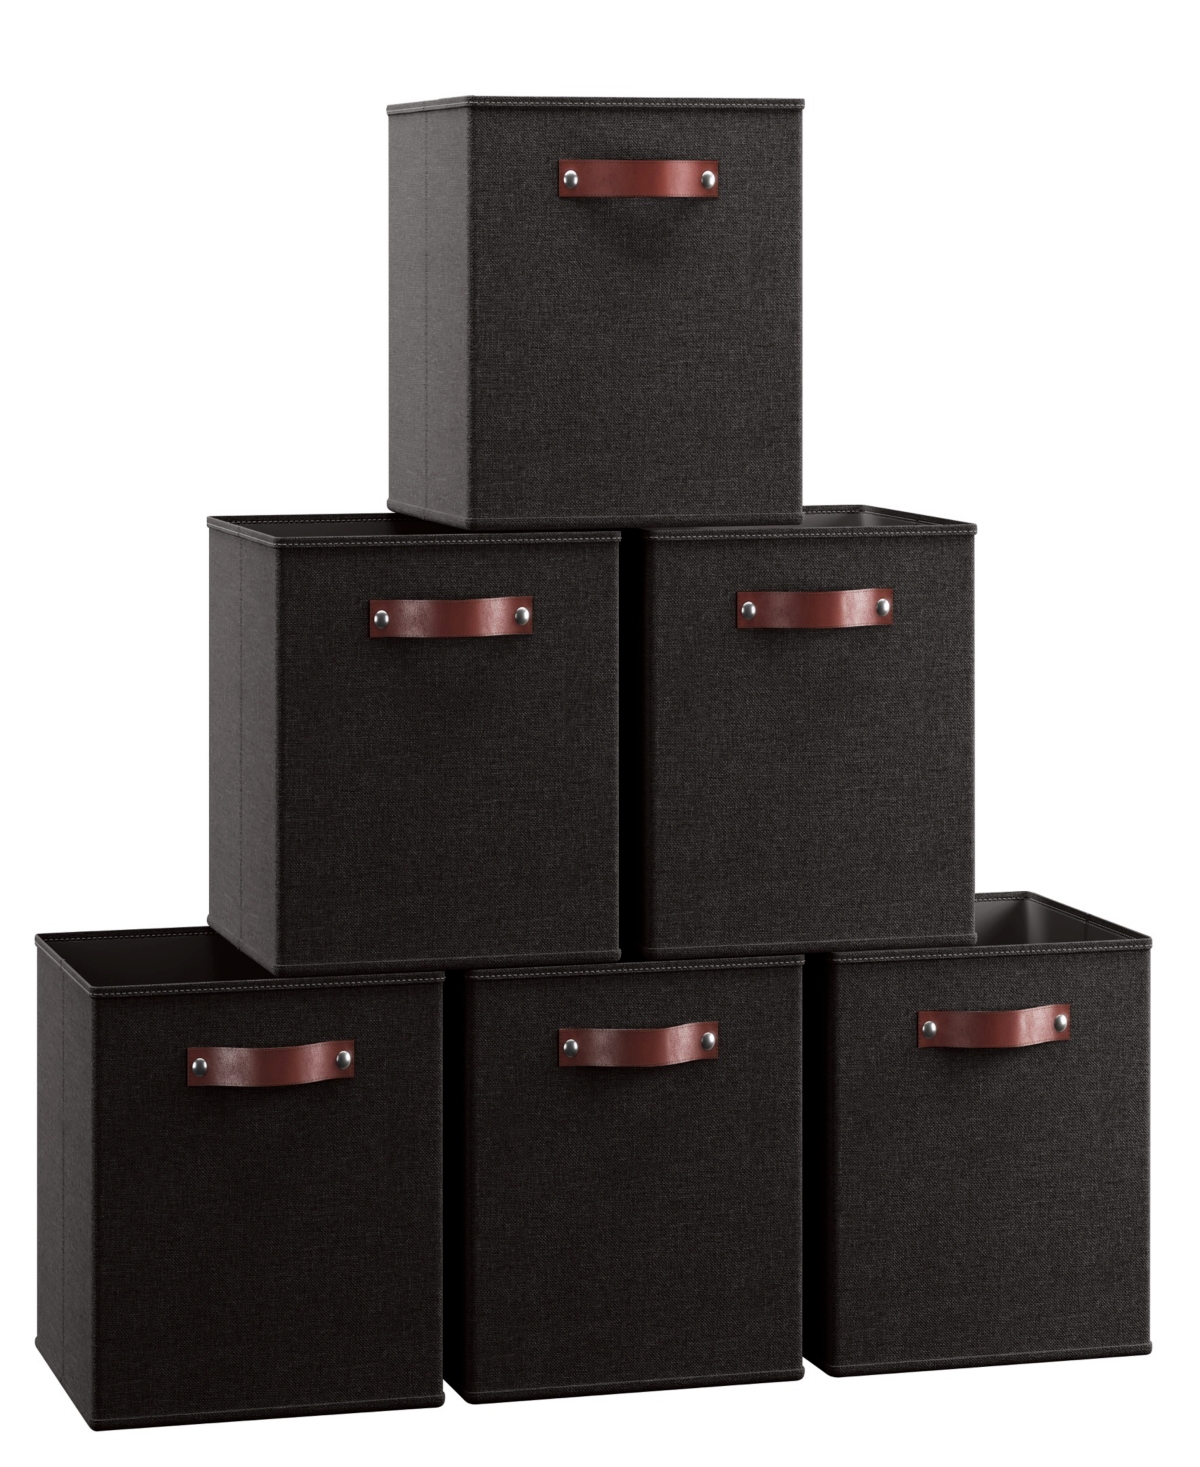 Foldable Linen Storage Cube Bin with Leather Handles - Set of 6 - Black